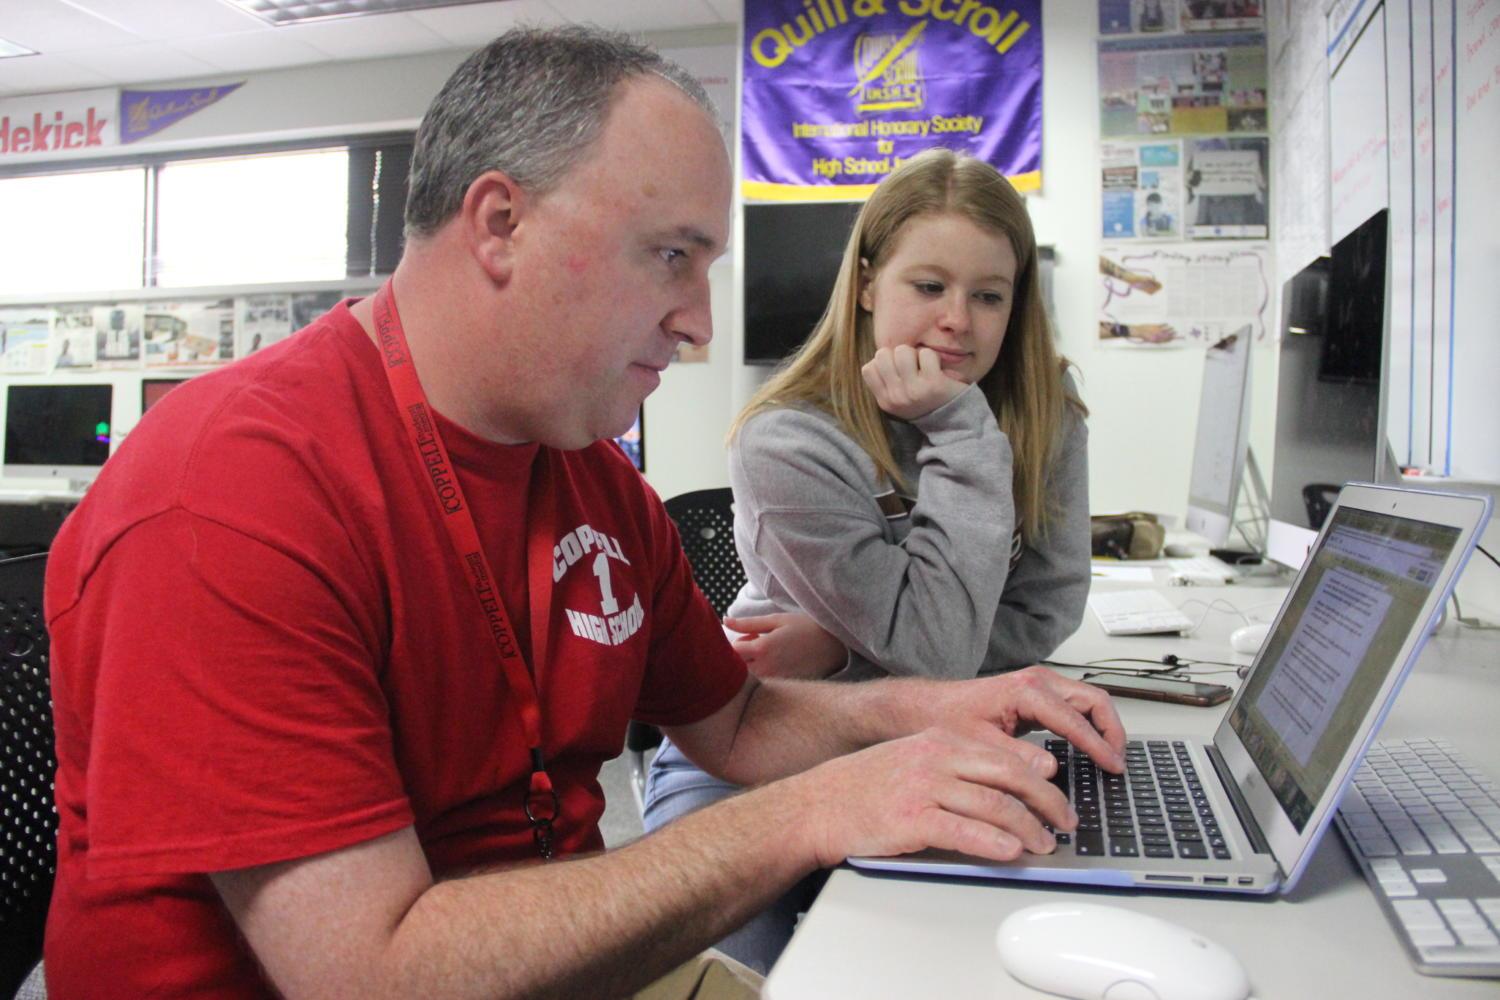 Coppell High School The Sidekick advisor Chase Wofford edits Editor-In-Chief Meara Isenberg’s story on May 10 during Wofford’s fourth period class. Wofford has been advisor for the award-winning newspaper staff for 12 years at CHS. Photo by Amanda Hair. 